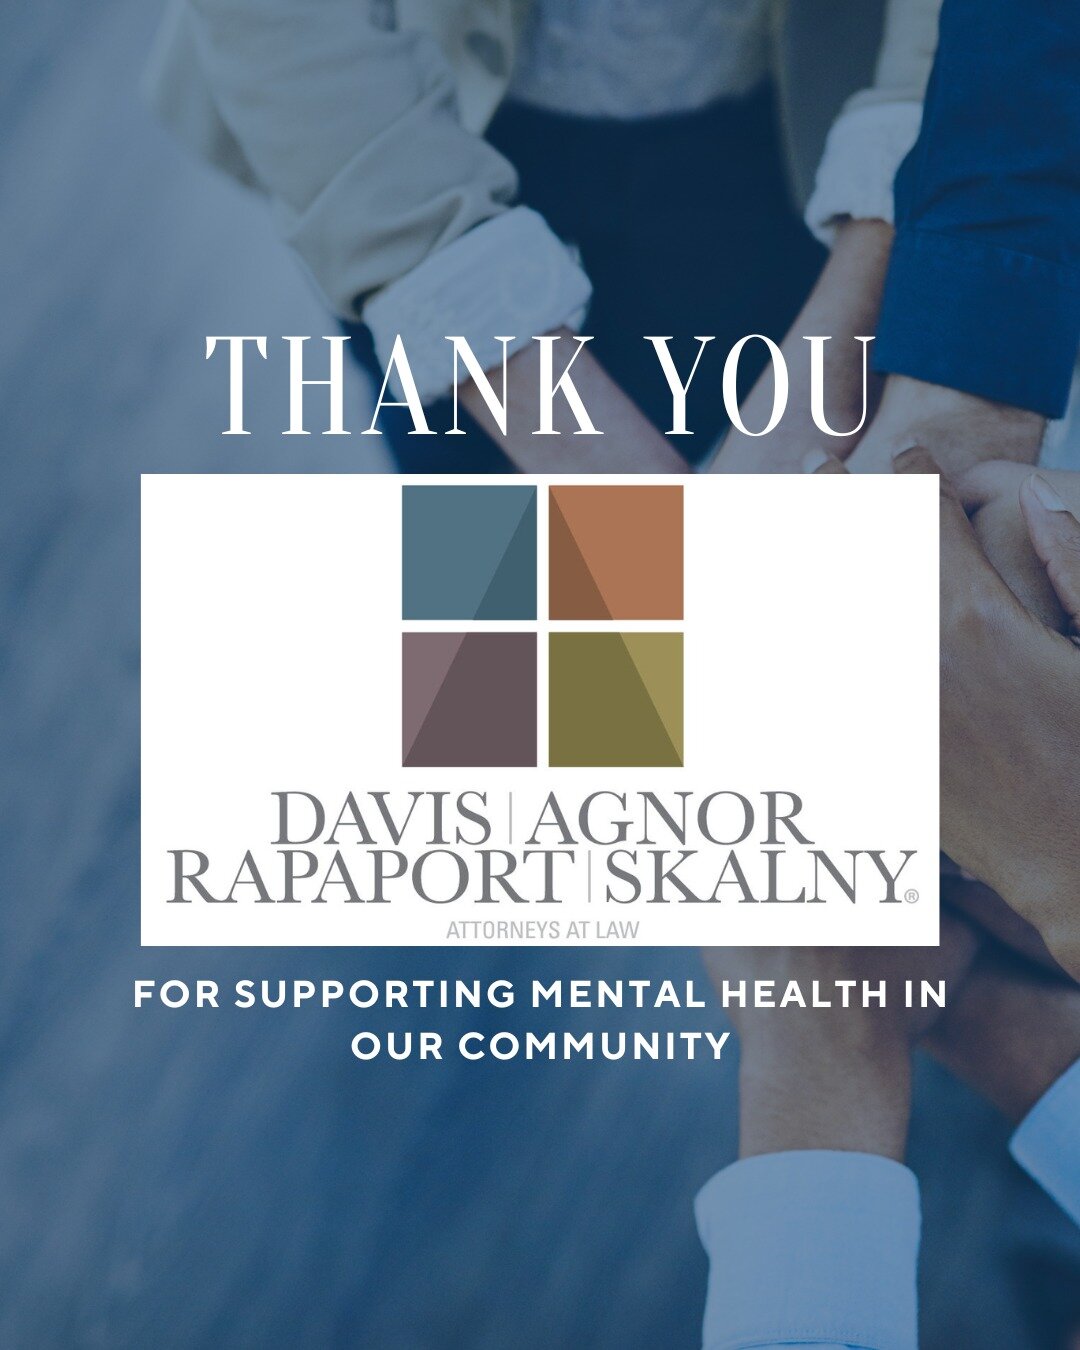 Thank you to this incredible sponsor, Davis, Agnor, Rapaport, &amp; Skalny LLC, for their generous contribution to our fundraiser! We are grateful for their support in helping us achieve our fundraising goals. With their help, we make a real differen